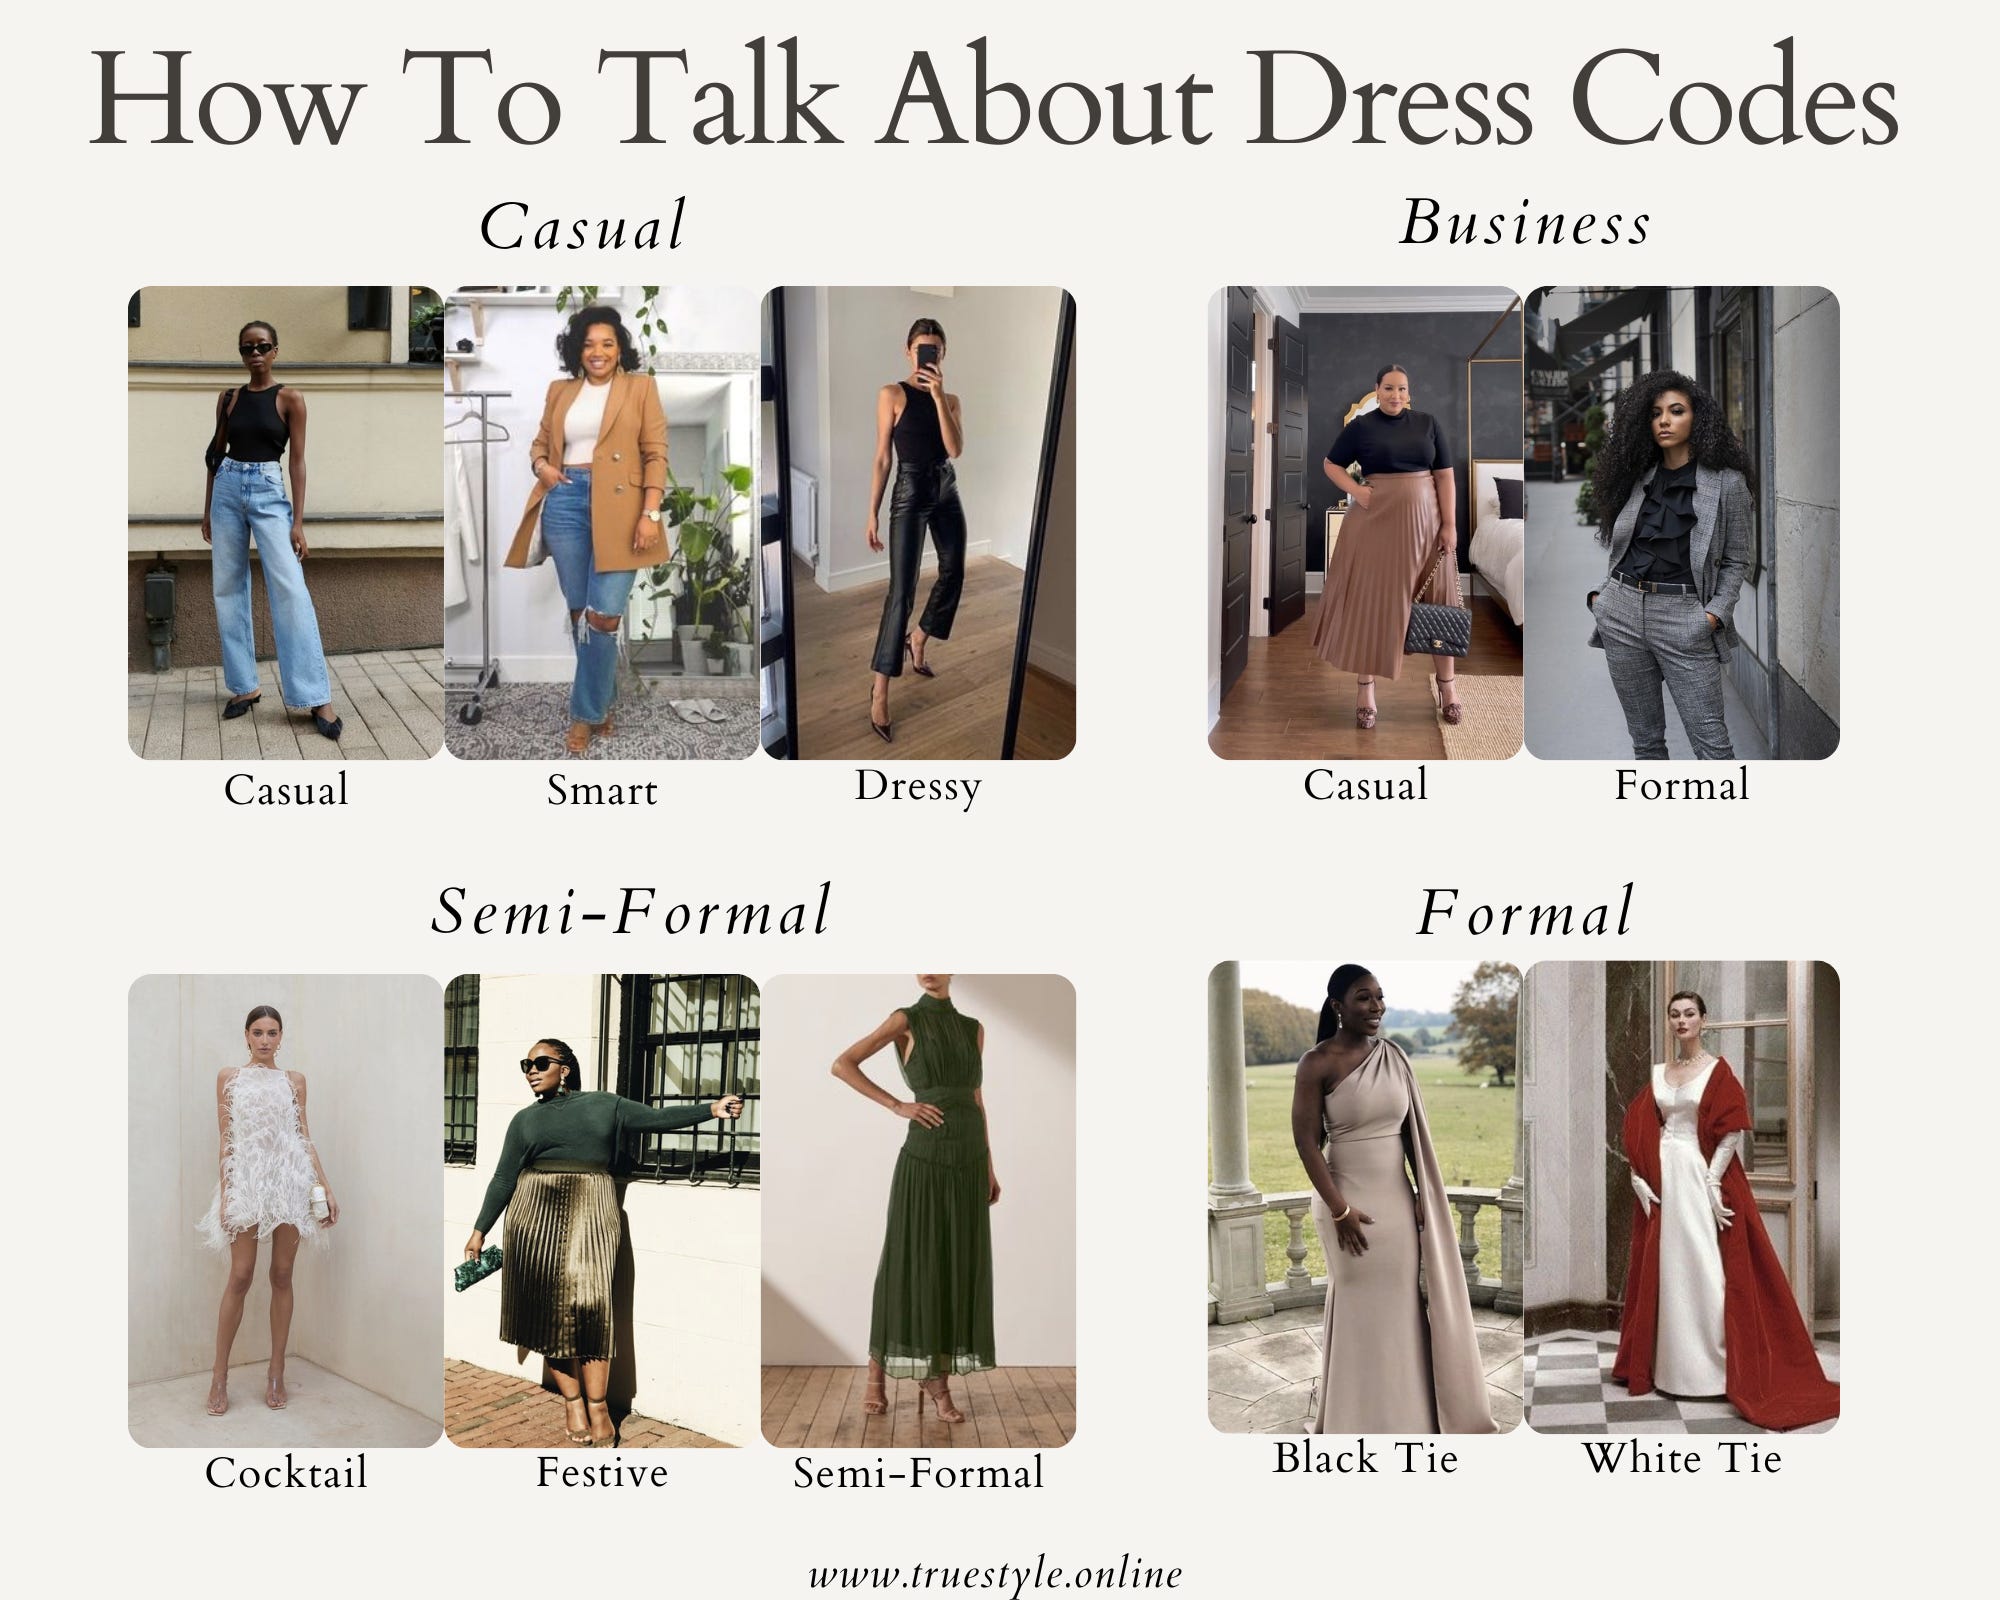 How To Talk About Clothes: Archetypes, Decades, and Dress Codes